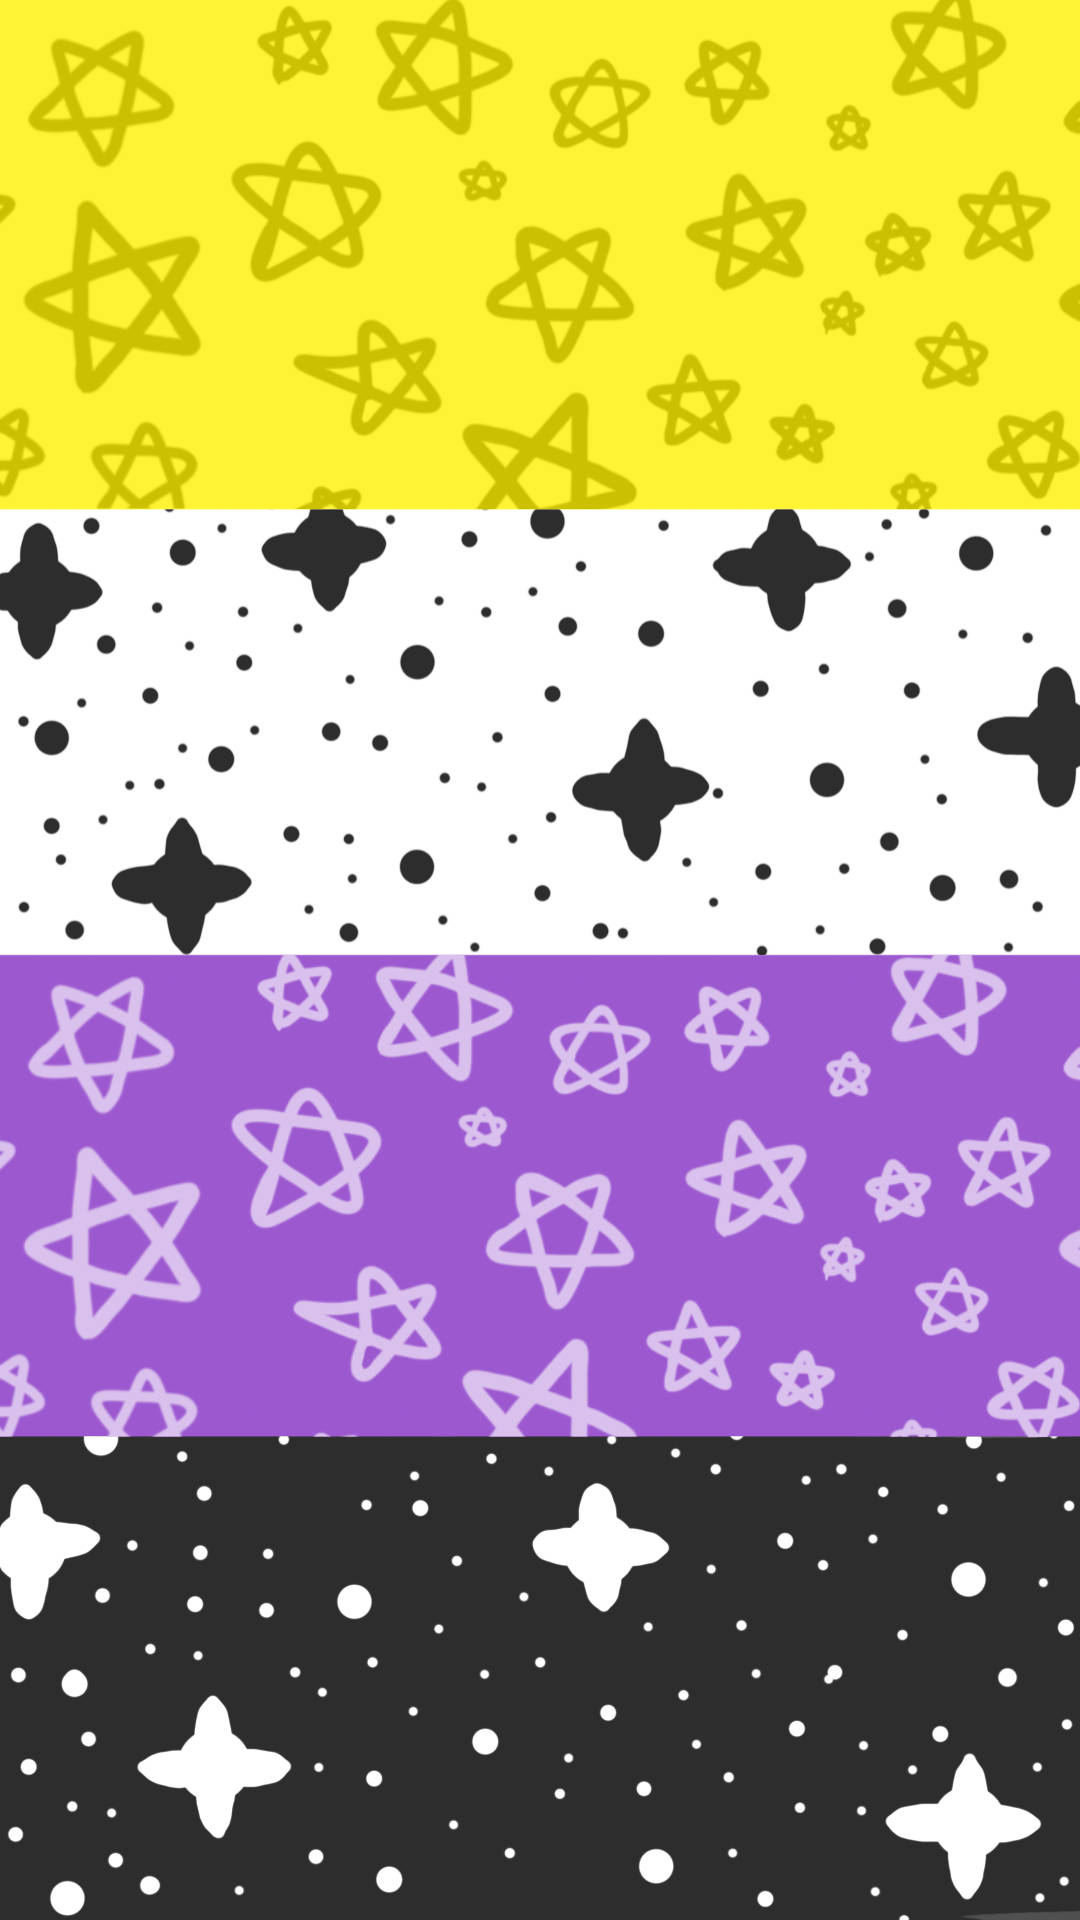 Download Four Different Patterns With Stars On Them Wallpaper  Wallpapers com